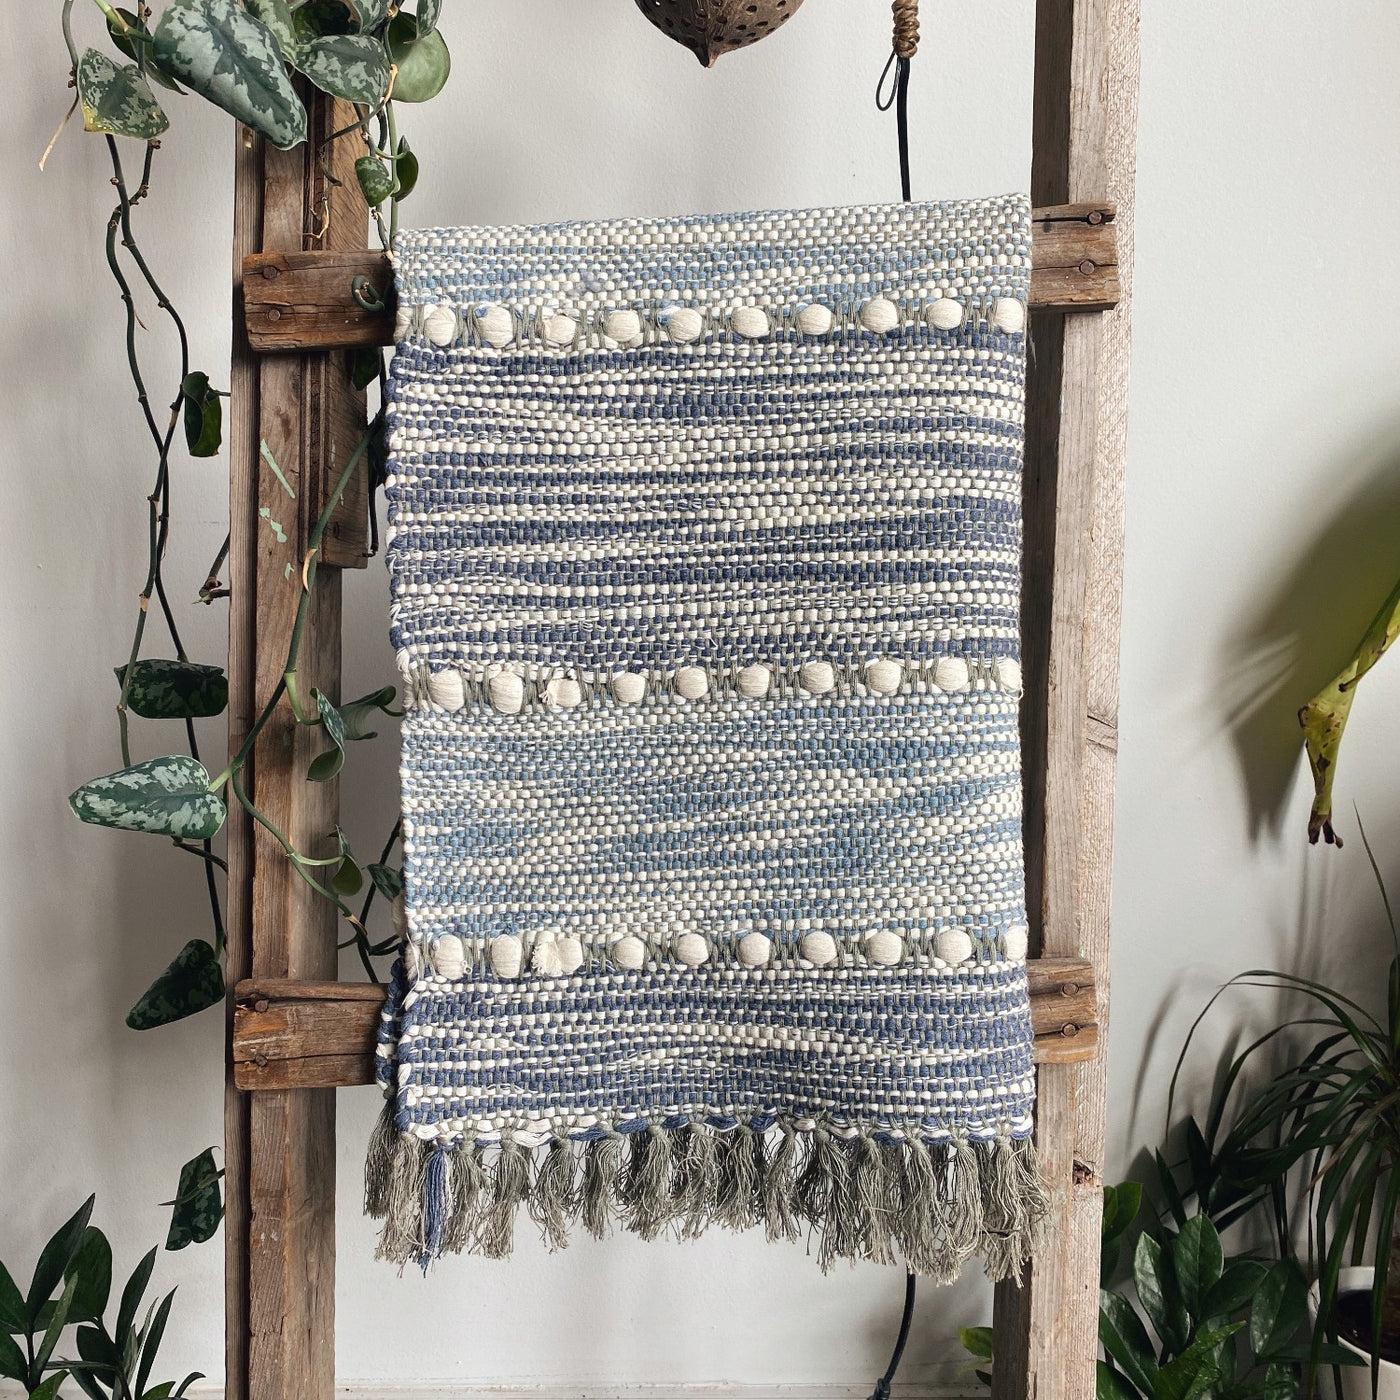 Striped handwoven blue and white cotton rug hanging on a wooden ladder